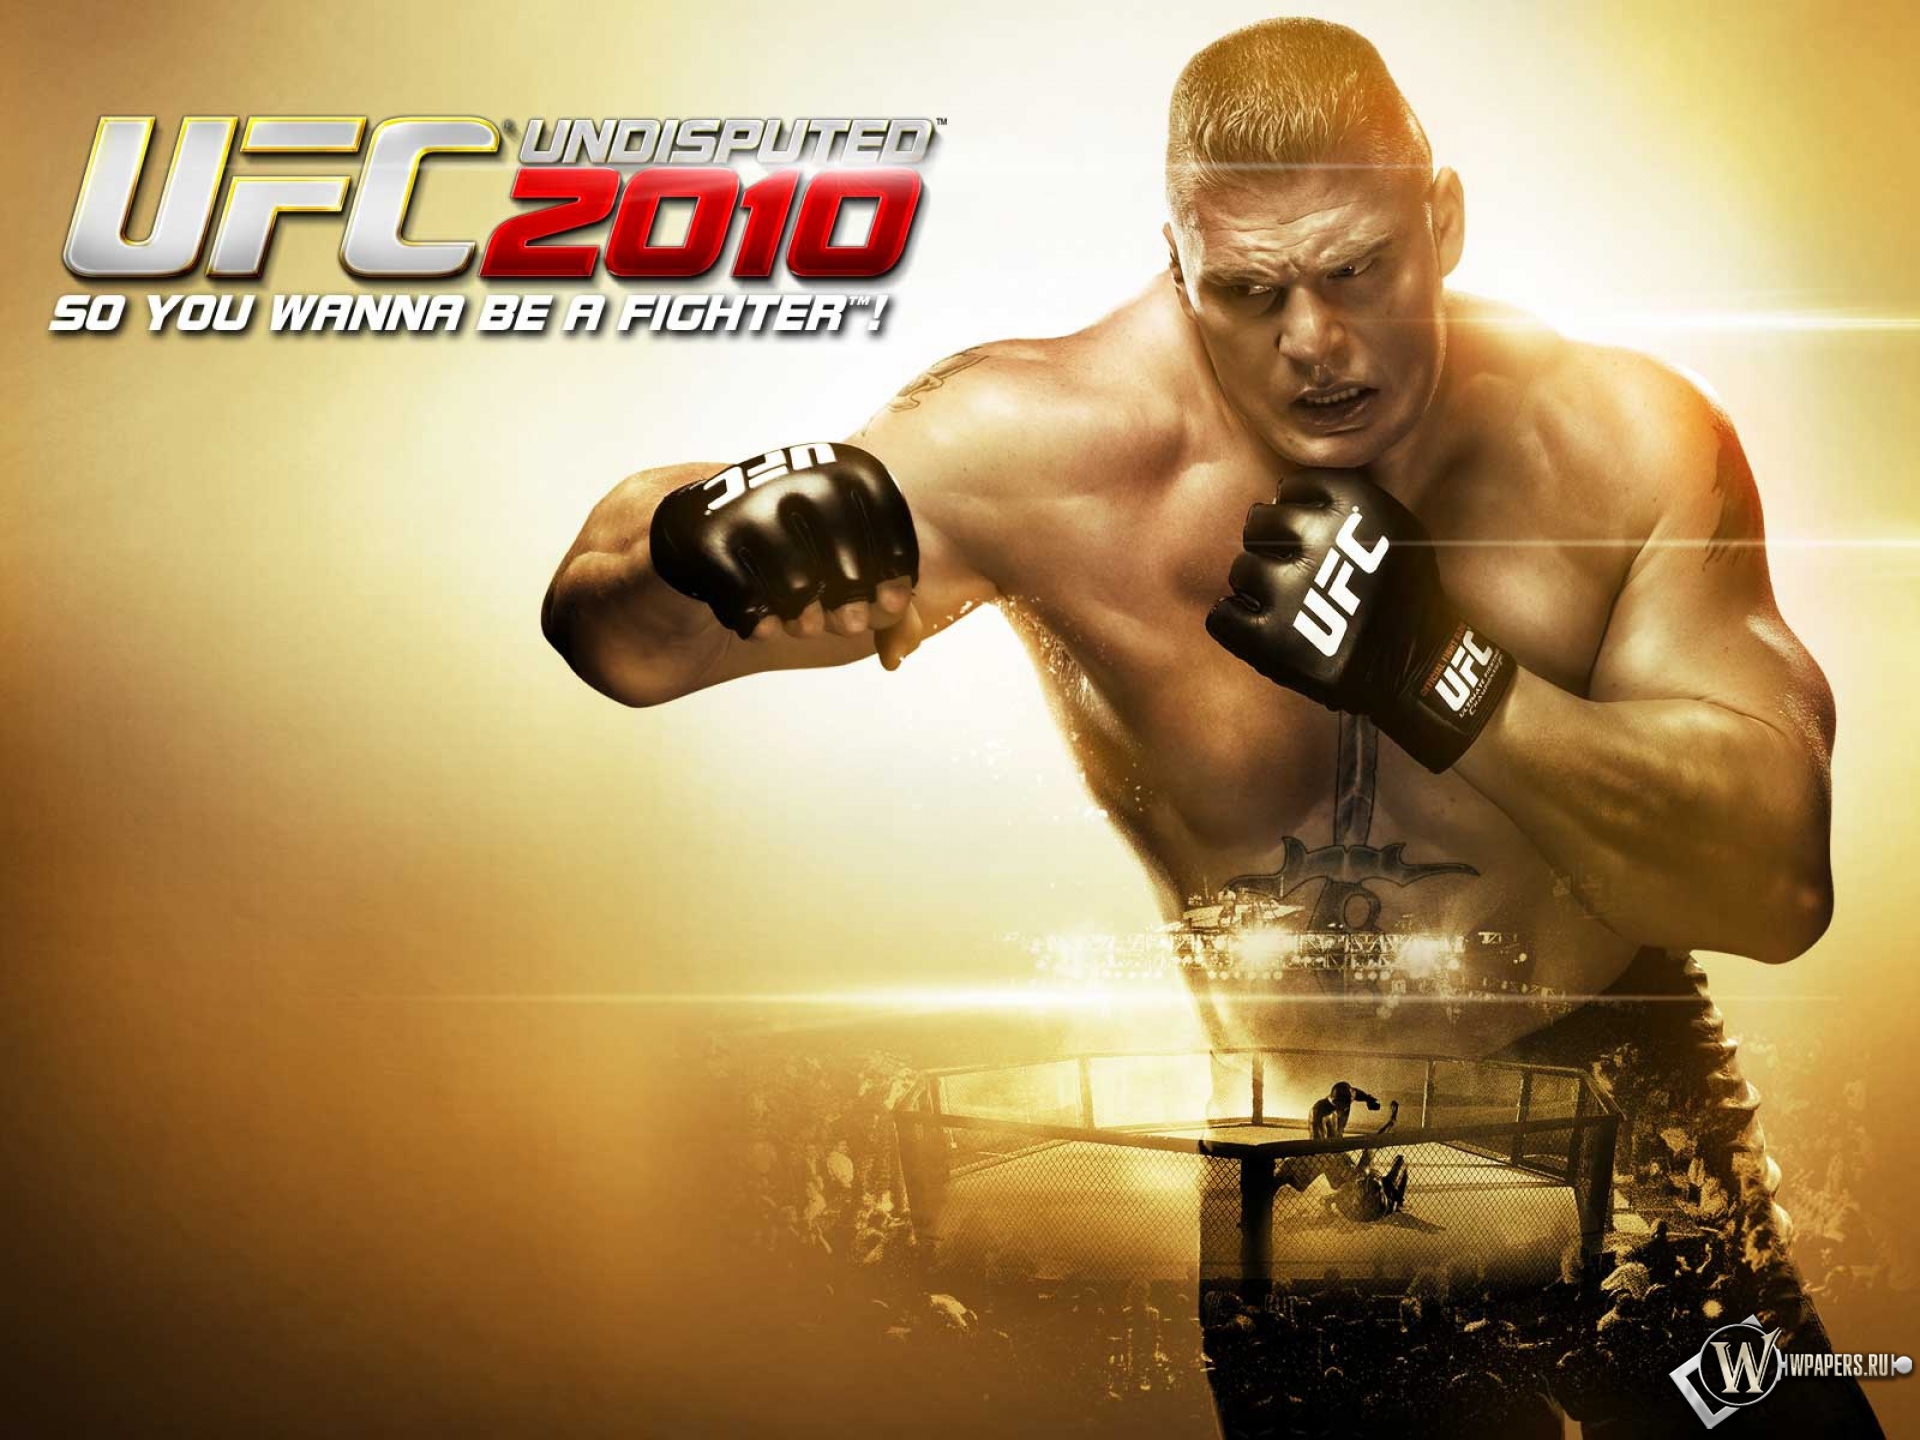 http://wpapers.ru/wallpapers/games/other-games/6653/1920x1440_UFC-2010.jpg